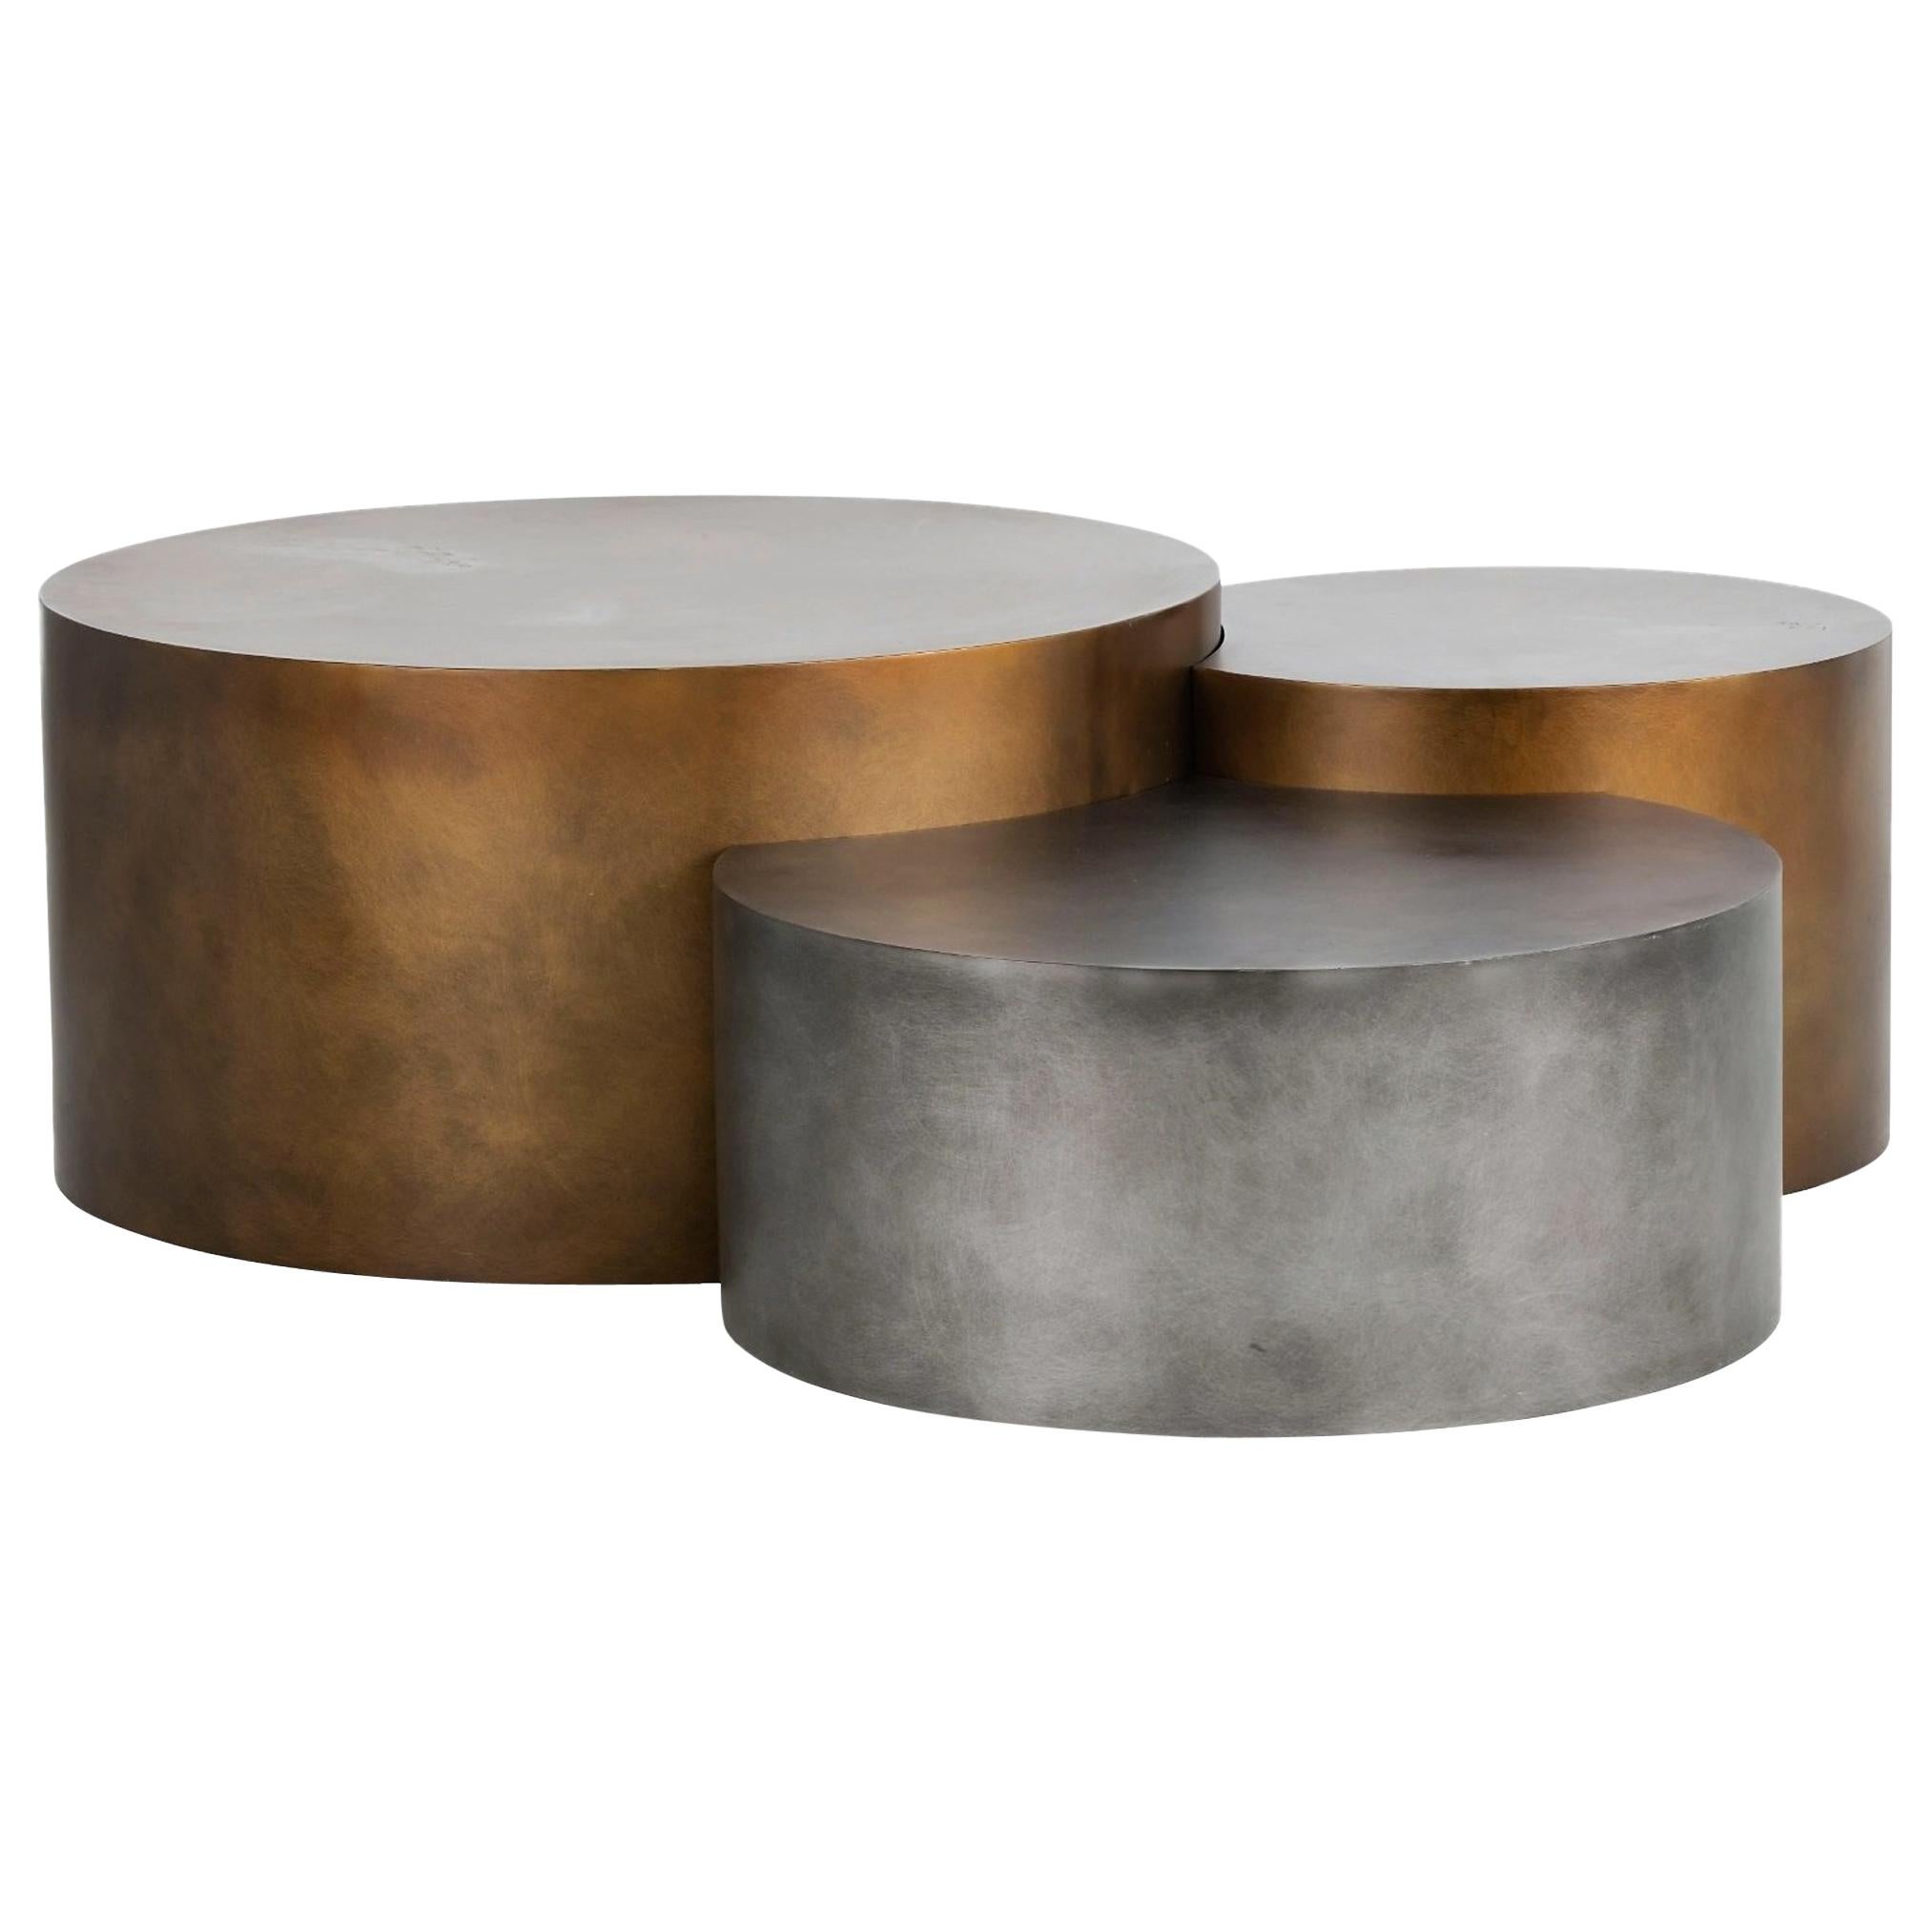 Metallic Composition of Three Low Tables in Different Heights and Finishes